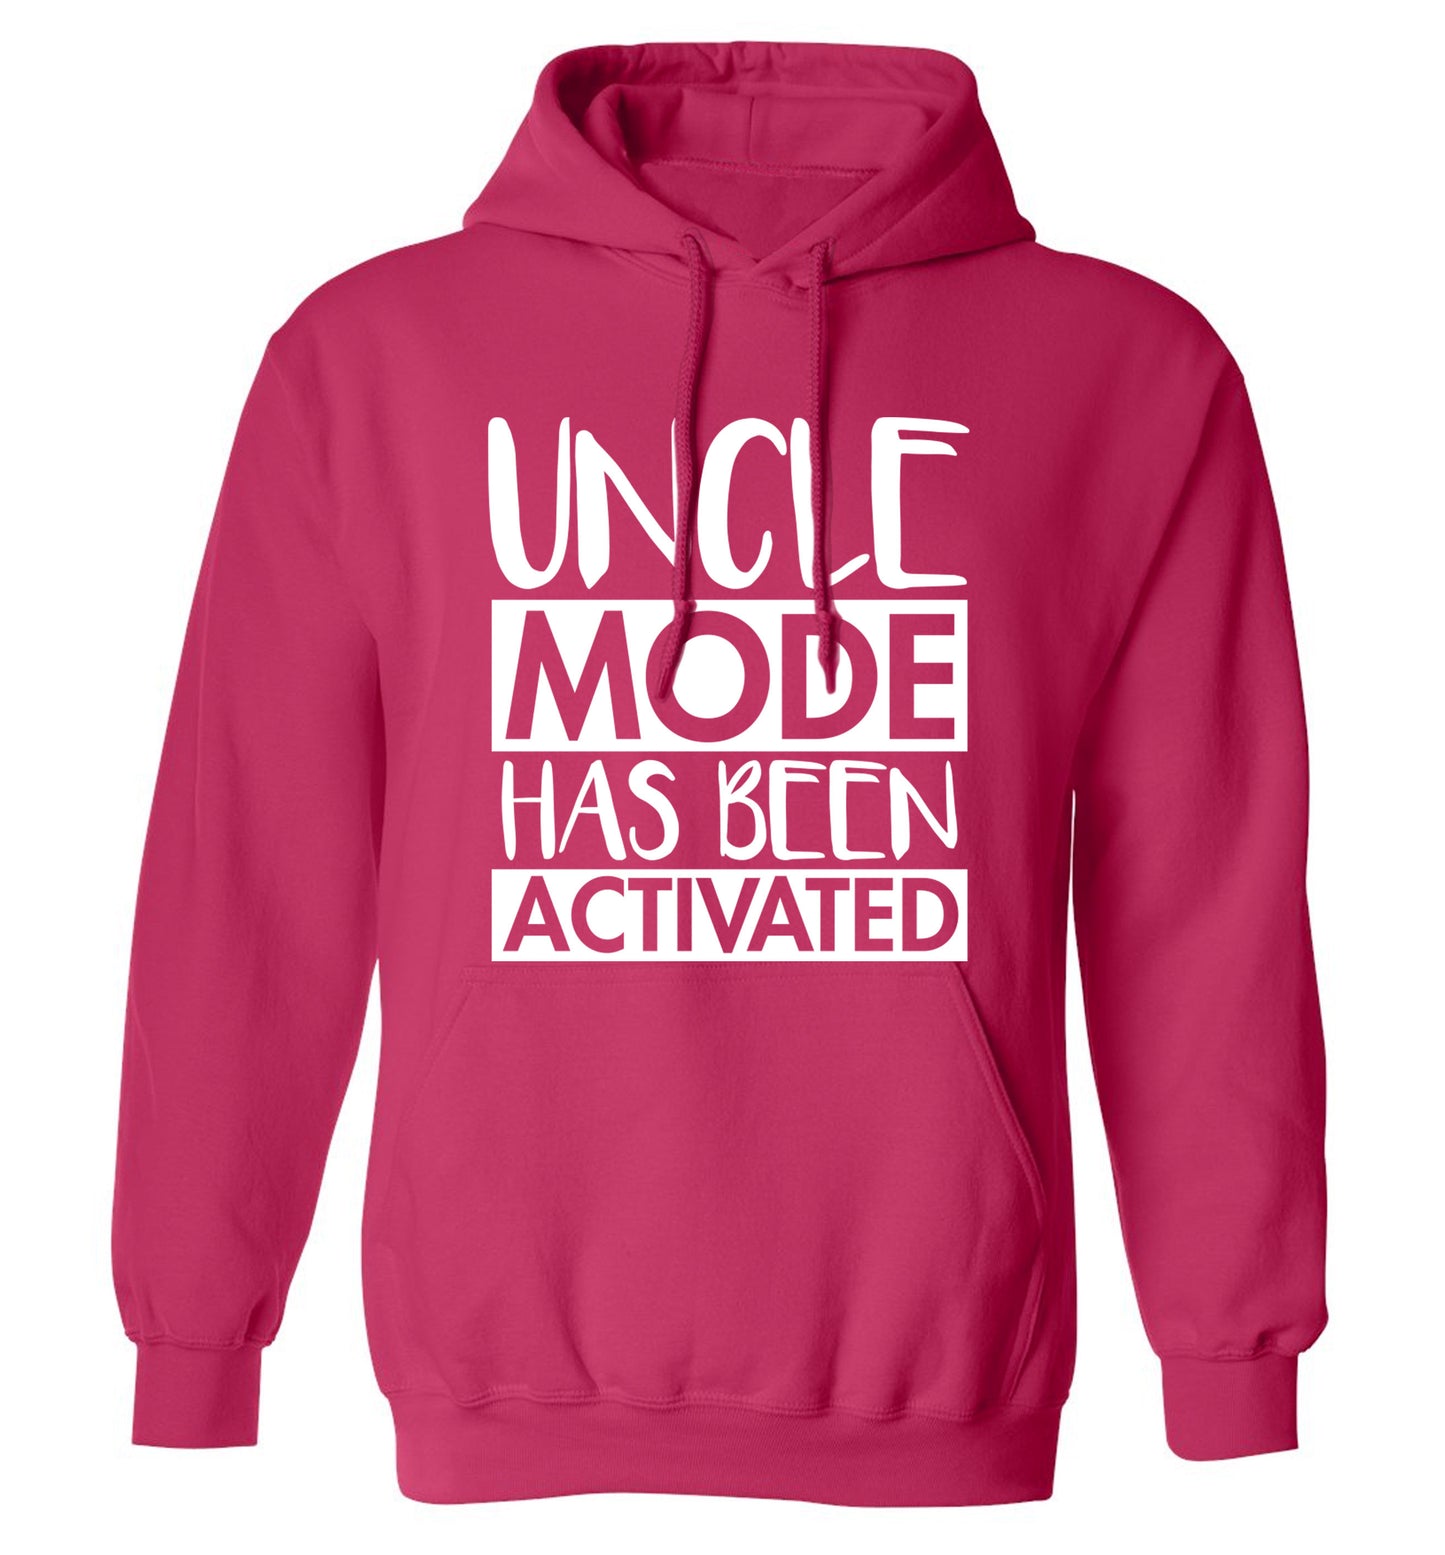 Uncle mode activated adults unisex pink hoodie 2XL